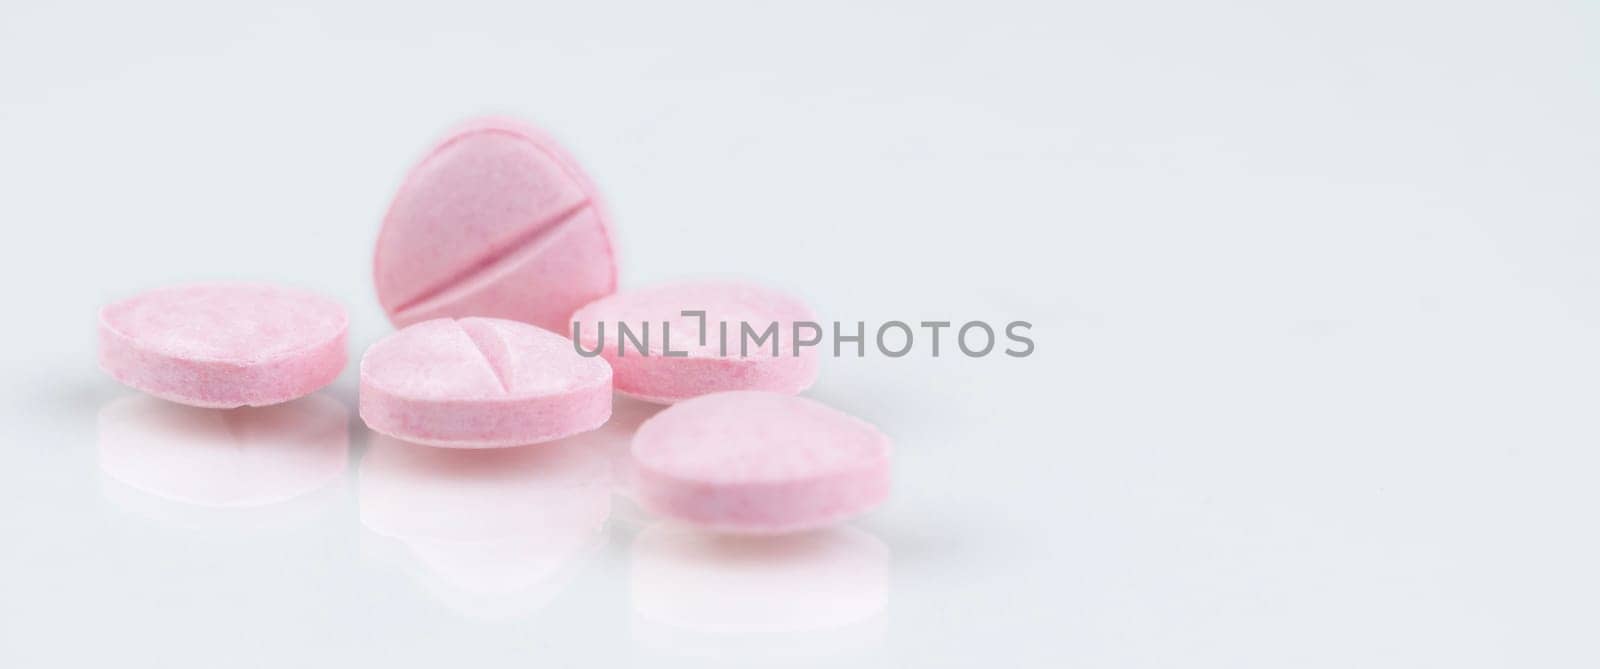 Pink tablets pills on white background. Health and medical care concept. Pharmacy banner. Prescription drug. Pharmaceutical industry. Medical center banner. Vitamins, minerals and supplements concept.